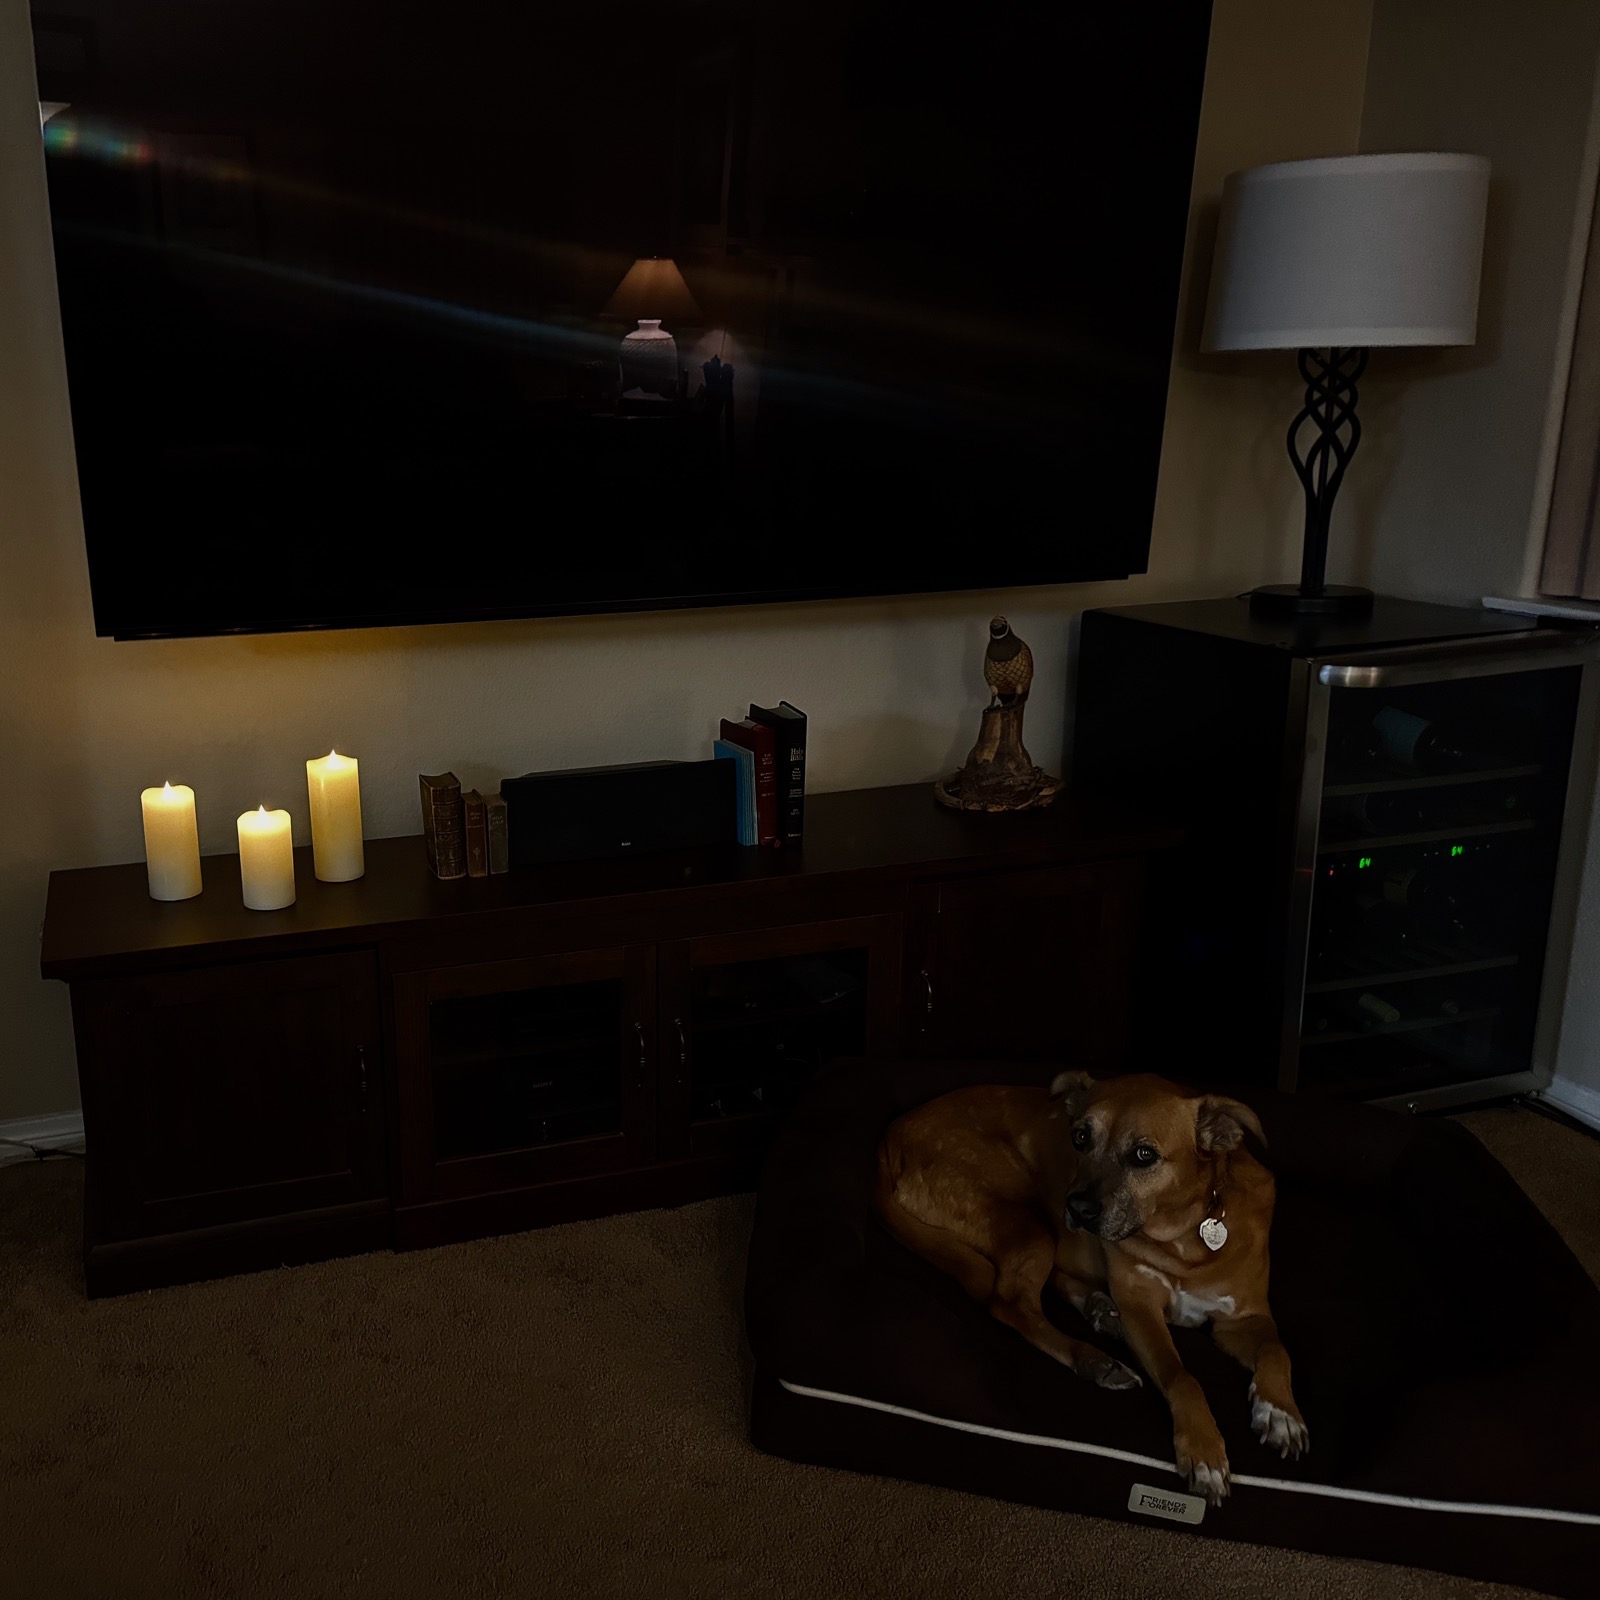 TECHLONG LED candles glowing on table below a large TV. a large brown dog named Tesla is on a dog bed in the foreground. The room has a warm, cozy glow.